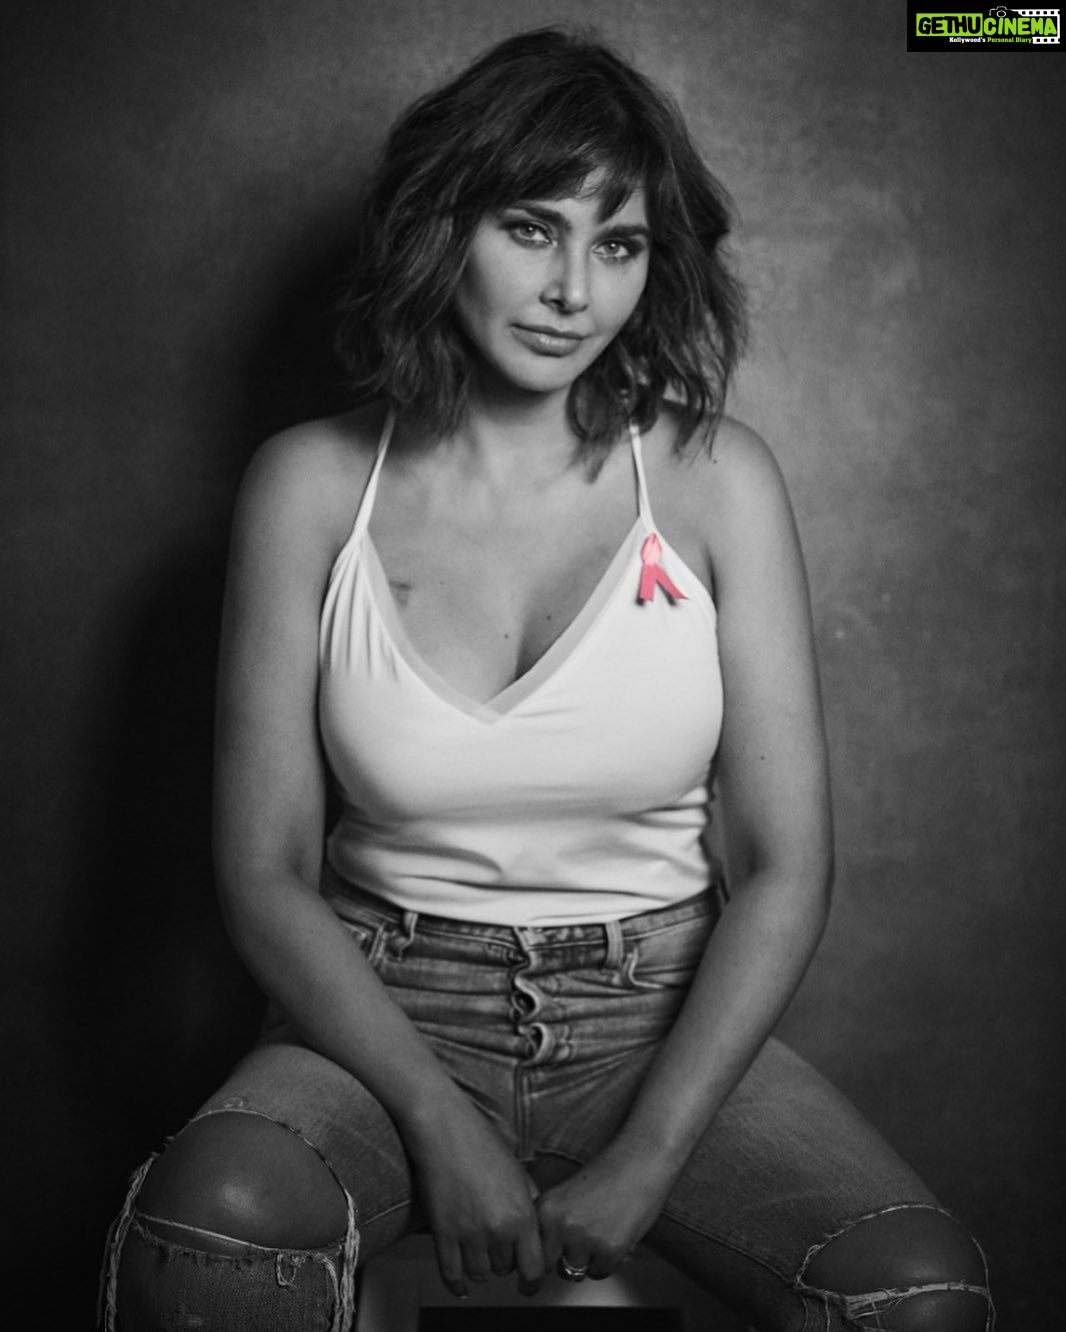 Lisa Ray Instagram - Thank you @rohanshrestha for capturing me in my element 🙏🏼 Every 15 seconds, somewhere in the world, a woman is diagnosed with breast cancer. In one way or another, we’re all drawn together by this disease. The Estée Lauder Companies in partnership with renowned photographer @rohanshrestha has created an emotional and impactful #WhiteTSeries to inspire a digital wave of awareness and fundraising - to create a Breast Cancer free world. ⁣⁠⠀ Join us in our mission by uploading a photo of a pink-themed look with the hashtags #TimeToEndBreastCancer #BCCIndia2019 and tagging @esteelaudercompanies. For every public post/story on Instagram with the hashtags in October 2019, The Estee Lauder Companies will donate Rs. 10 on your behalf to fund breast cancer awareness initiatives, research, education, and medical support. MUH @shraddhabachani